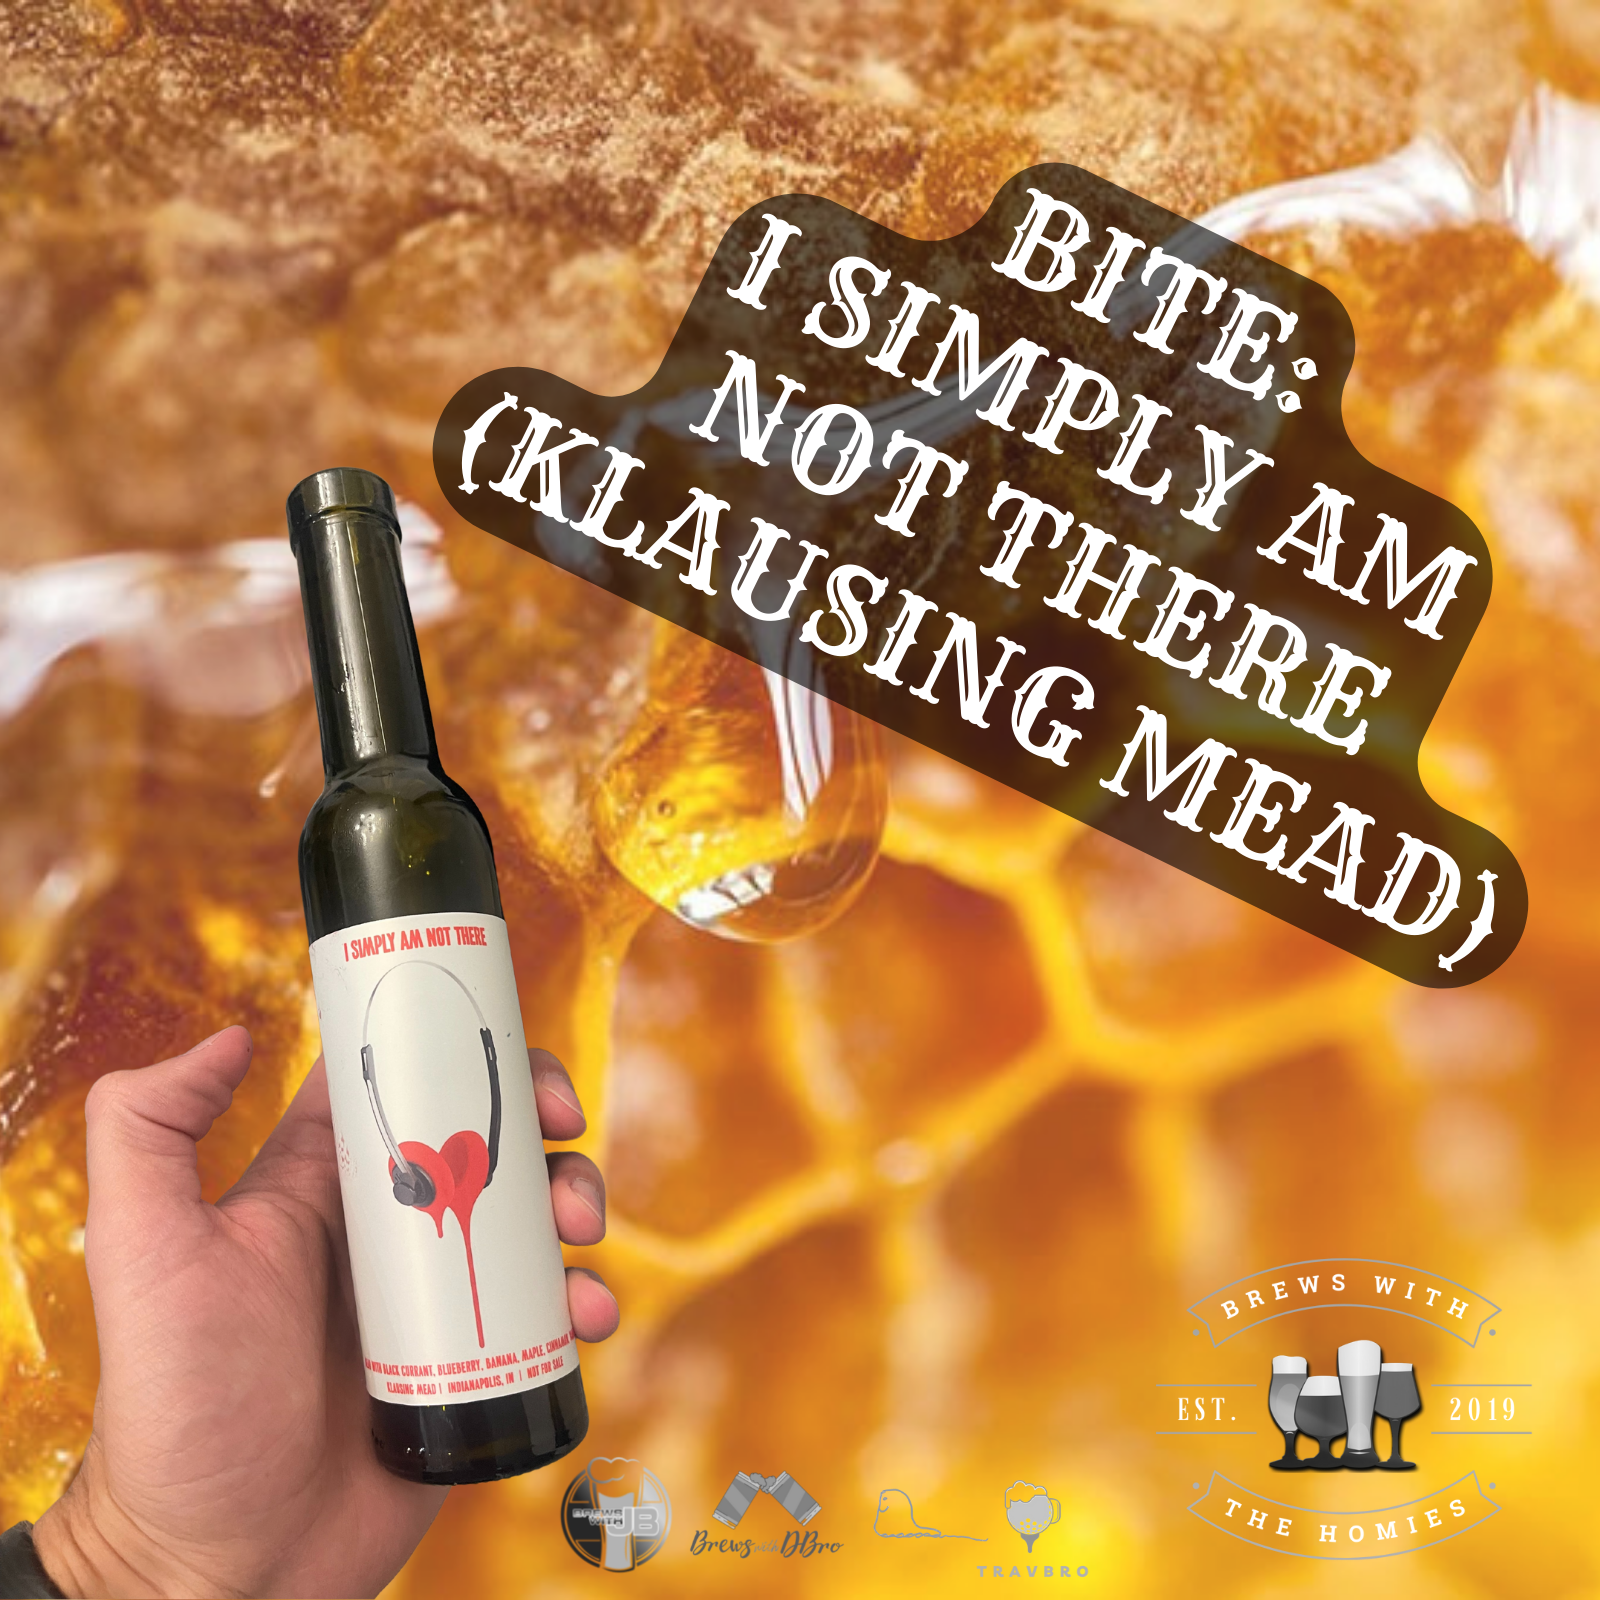 Bite: "I Am Simply Not There" (Klausing Mead)